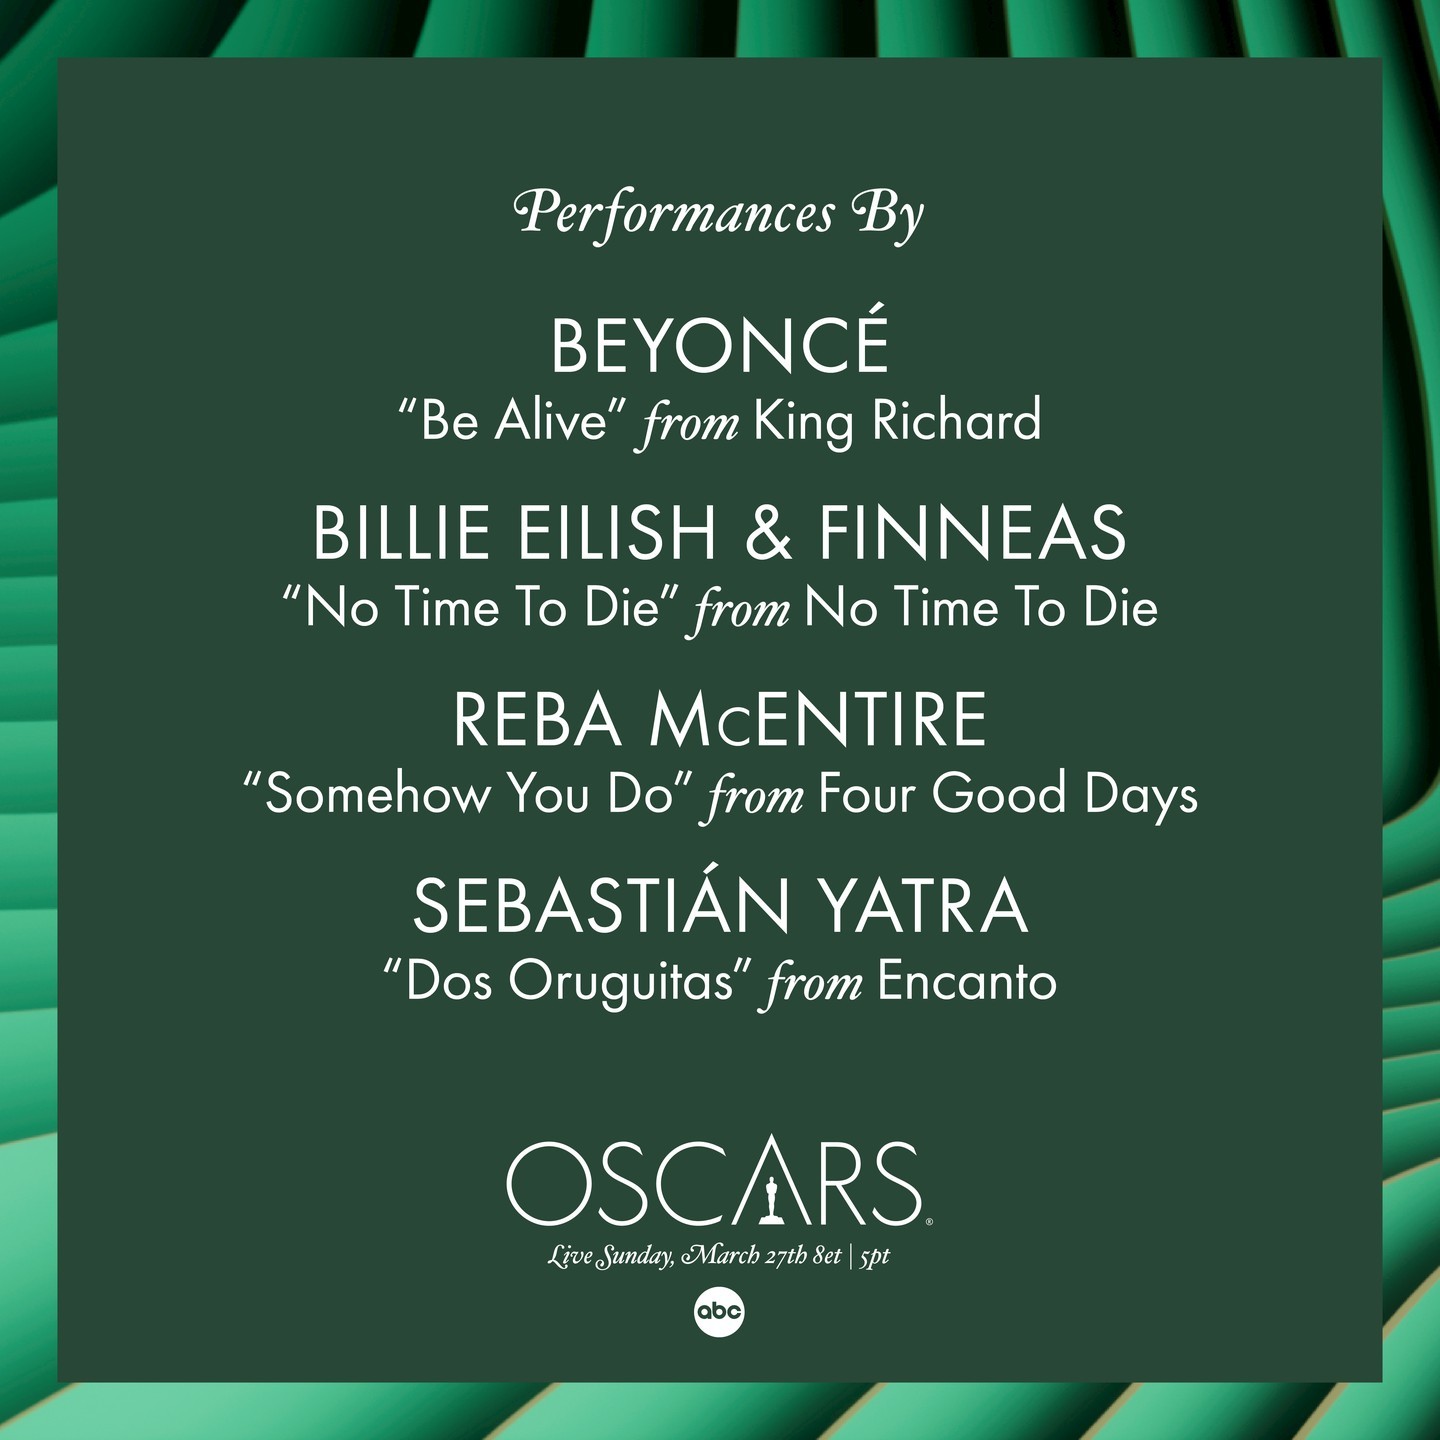 Beyonce, Billie Eilish, Finneas, &Amp; Reba Mcentire All Confirmed To Perform At The 2022 Oscars, Yours Truly, News, August 18, 2022